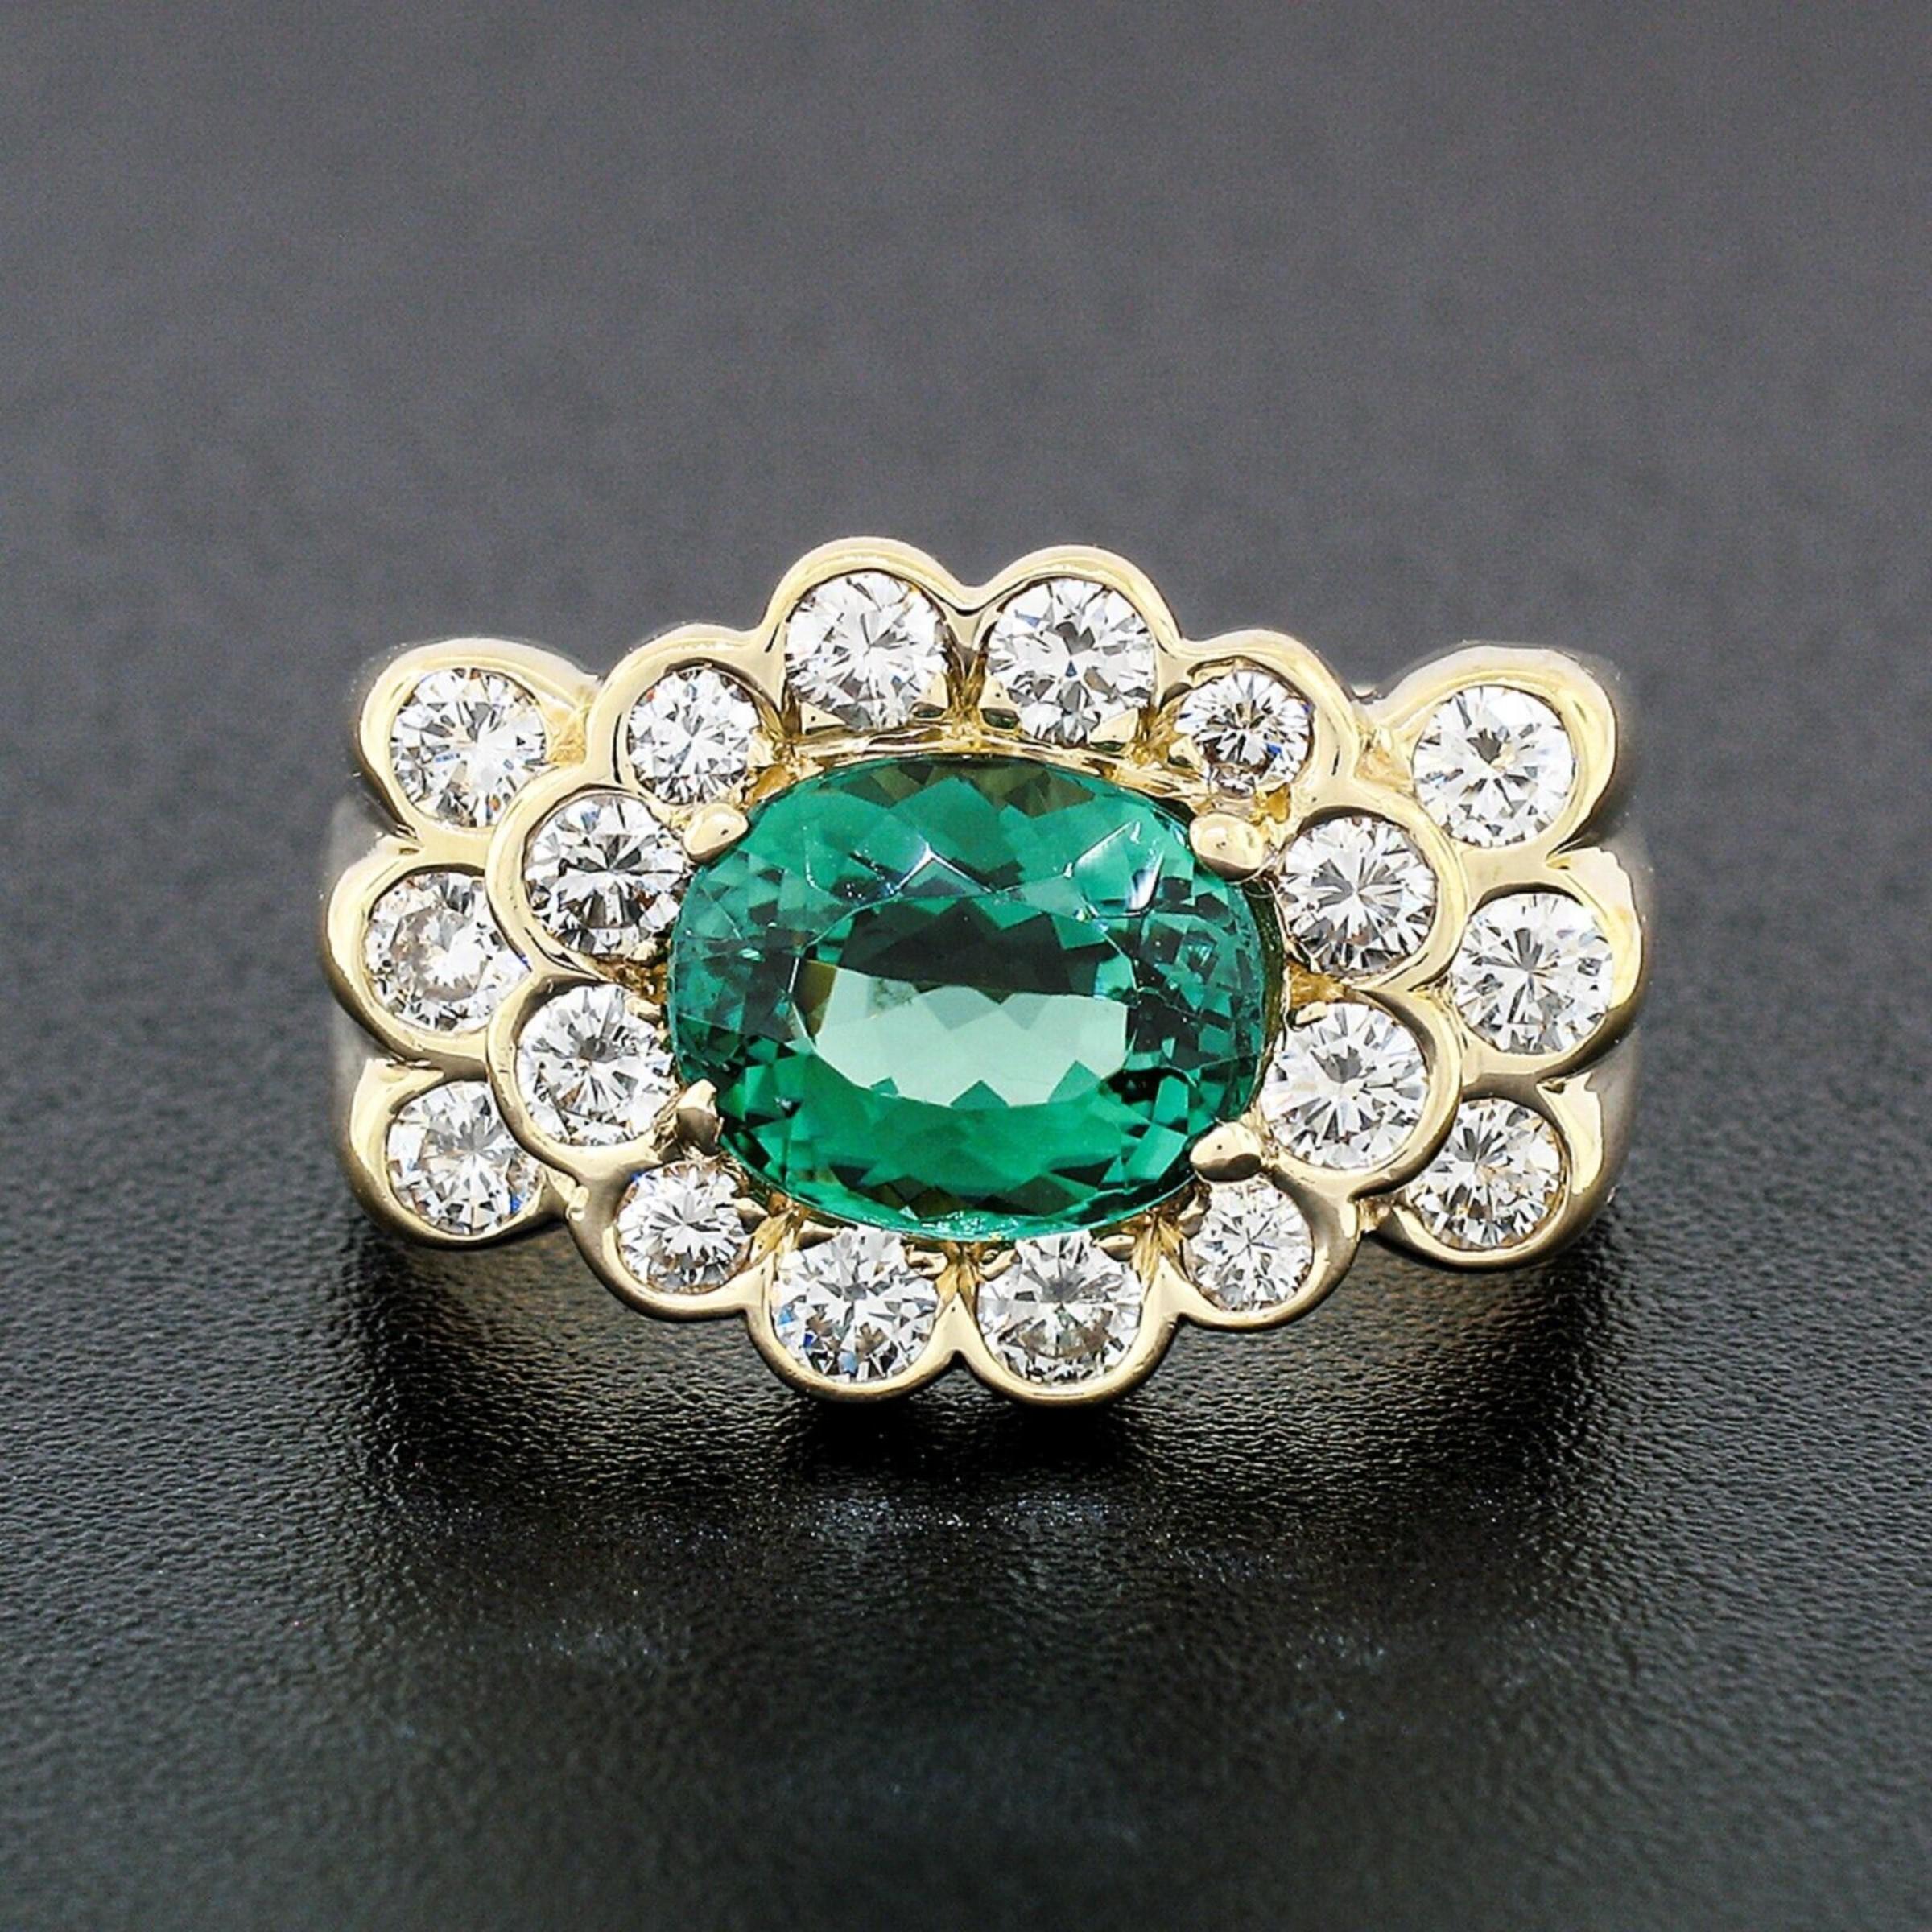 This breathtaking cocktail ring was crafted from solid 14k yellow gold and features a very fine tourmaline solitaire surrounded by stunning diamonds in which completely cover the top of the ring. The oval tourmaline lays sideways, neatly set at the